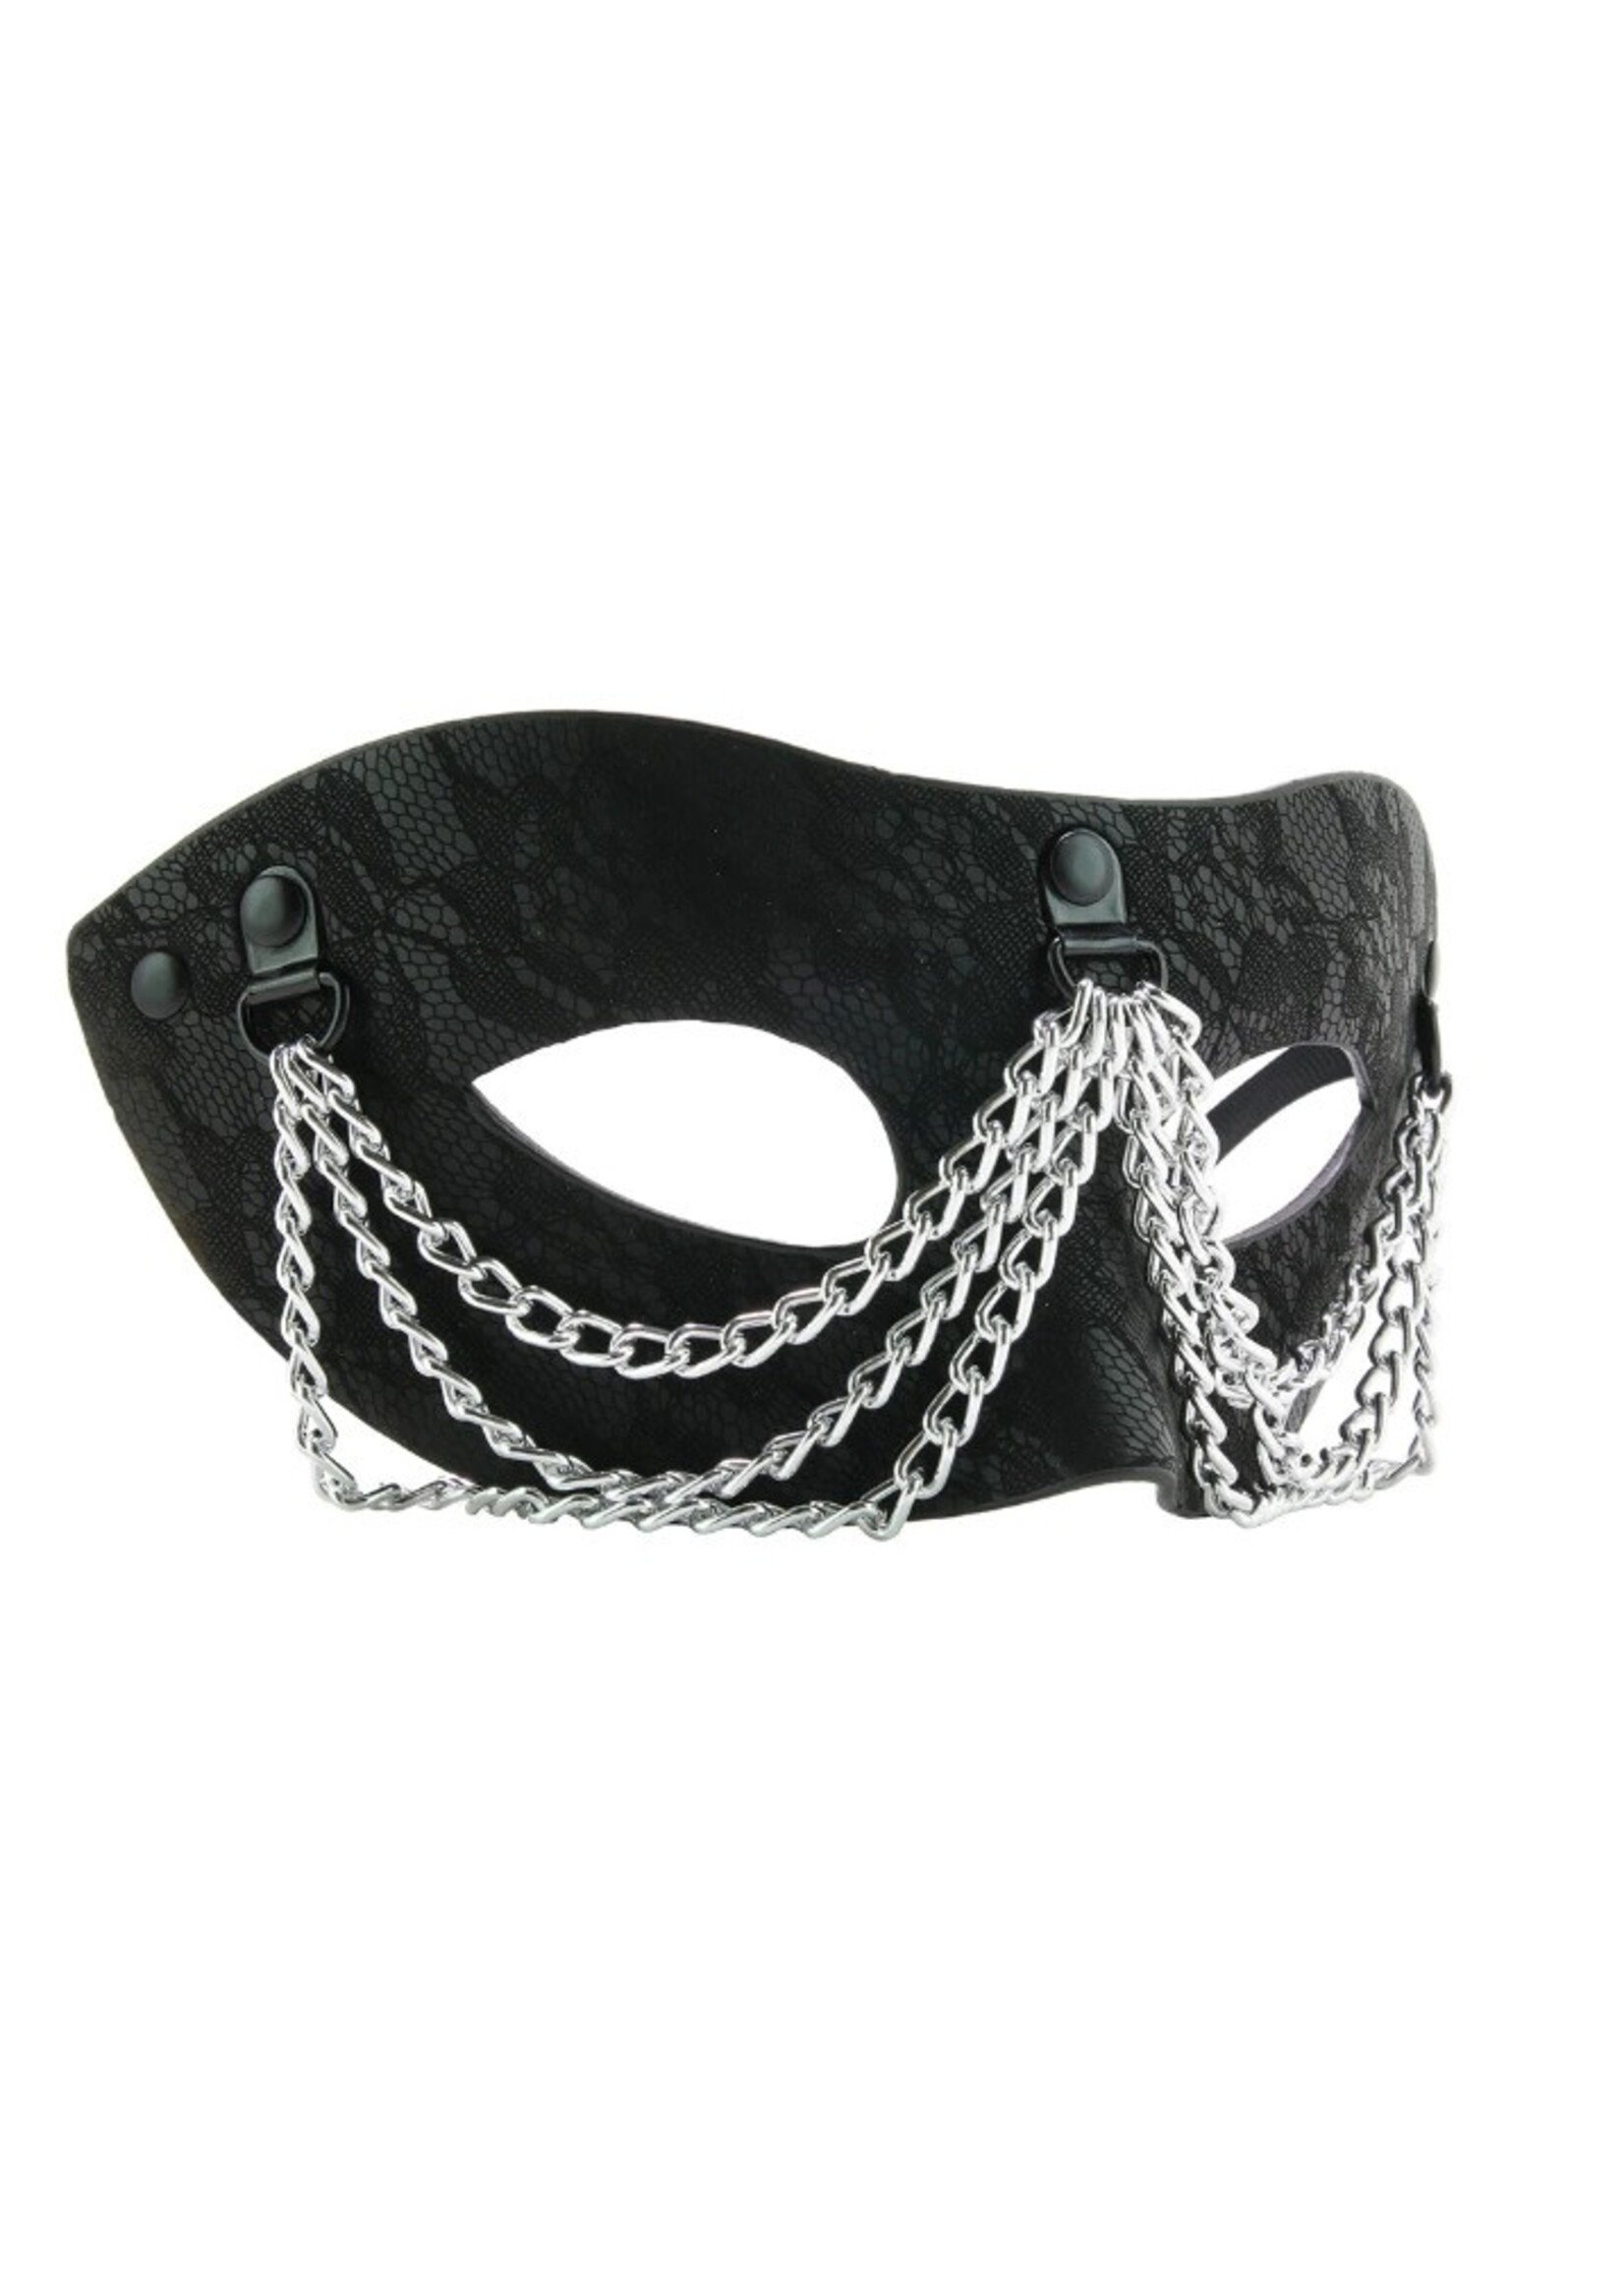 Sincerely Chained Lace Mask in Black